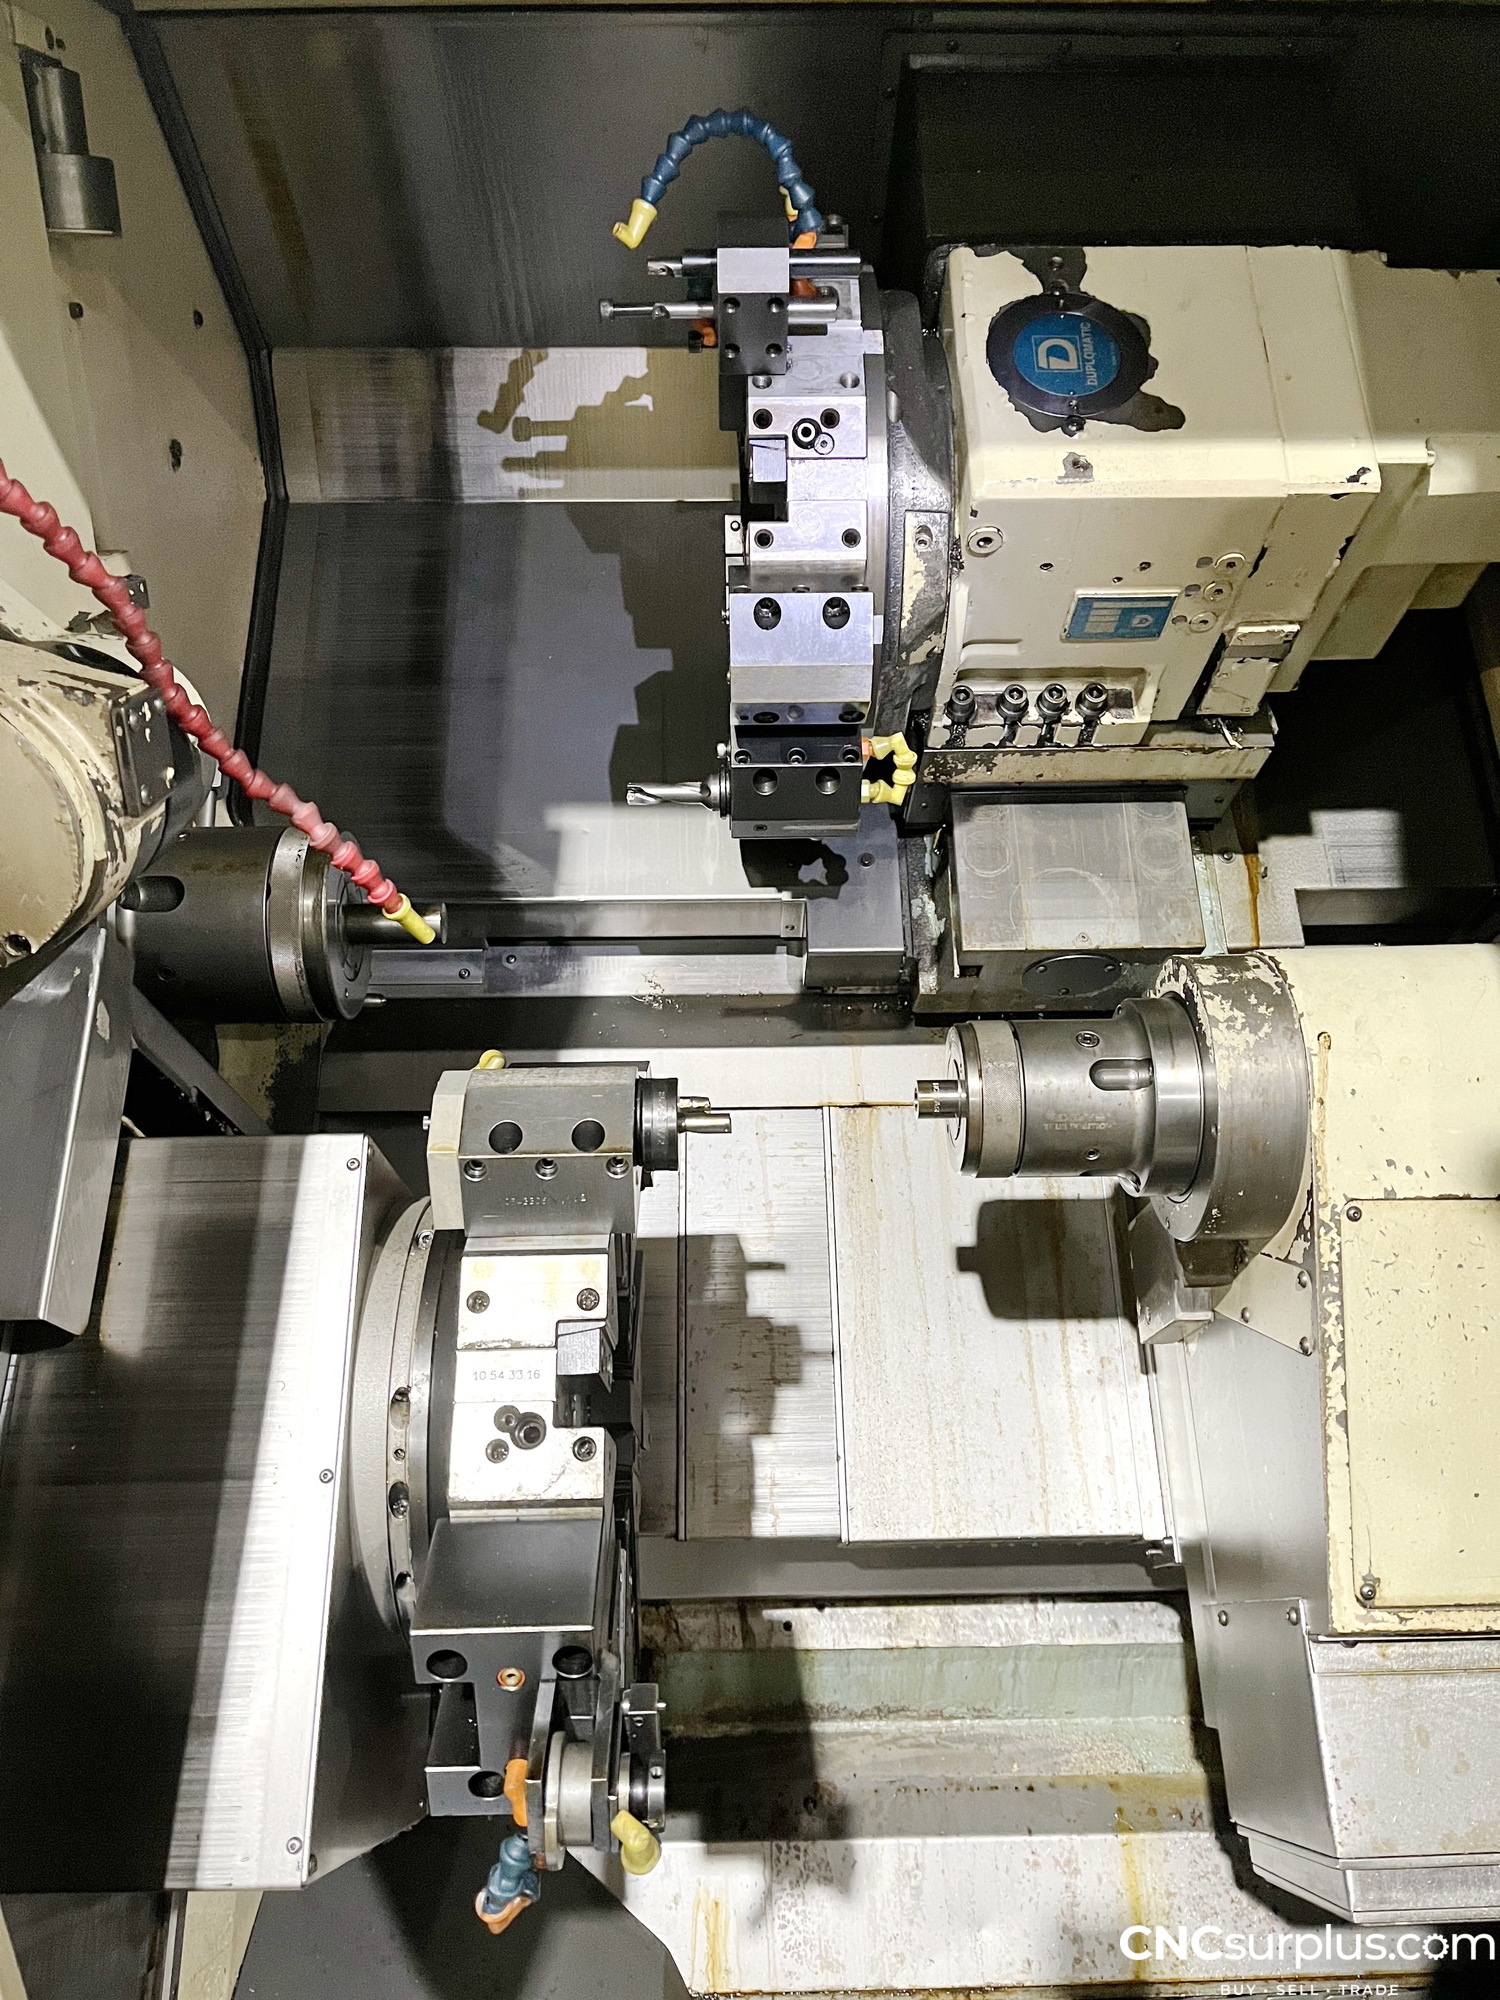 1998 EUROTECH 710SLL 5-Axis or More CNC Lathes | CNCsurplus, A Div. of Comtex Leasing Corp.